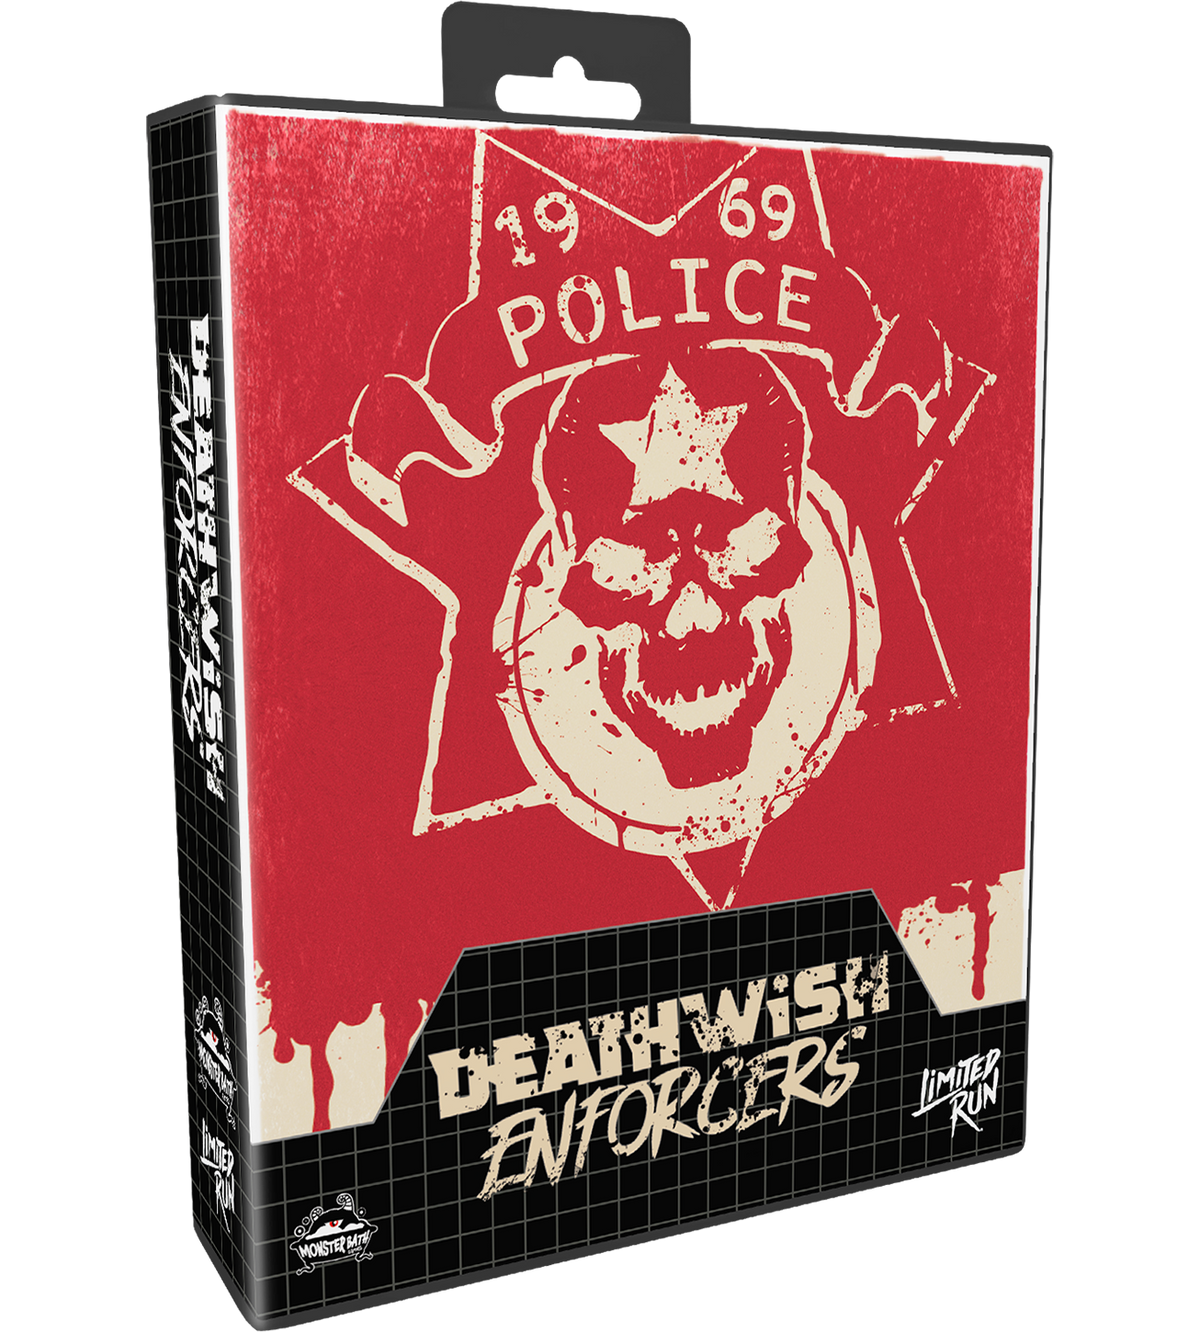 PS5 Limited Run #56: Deathwish Enforcers Classic Edition